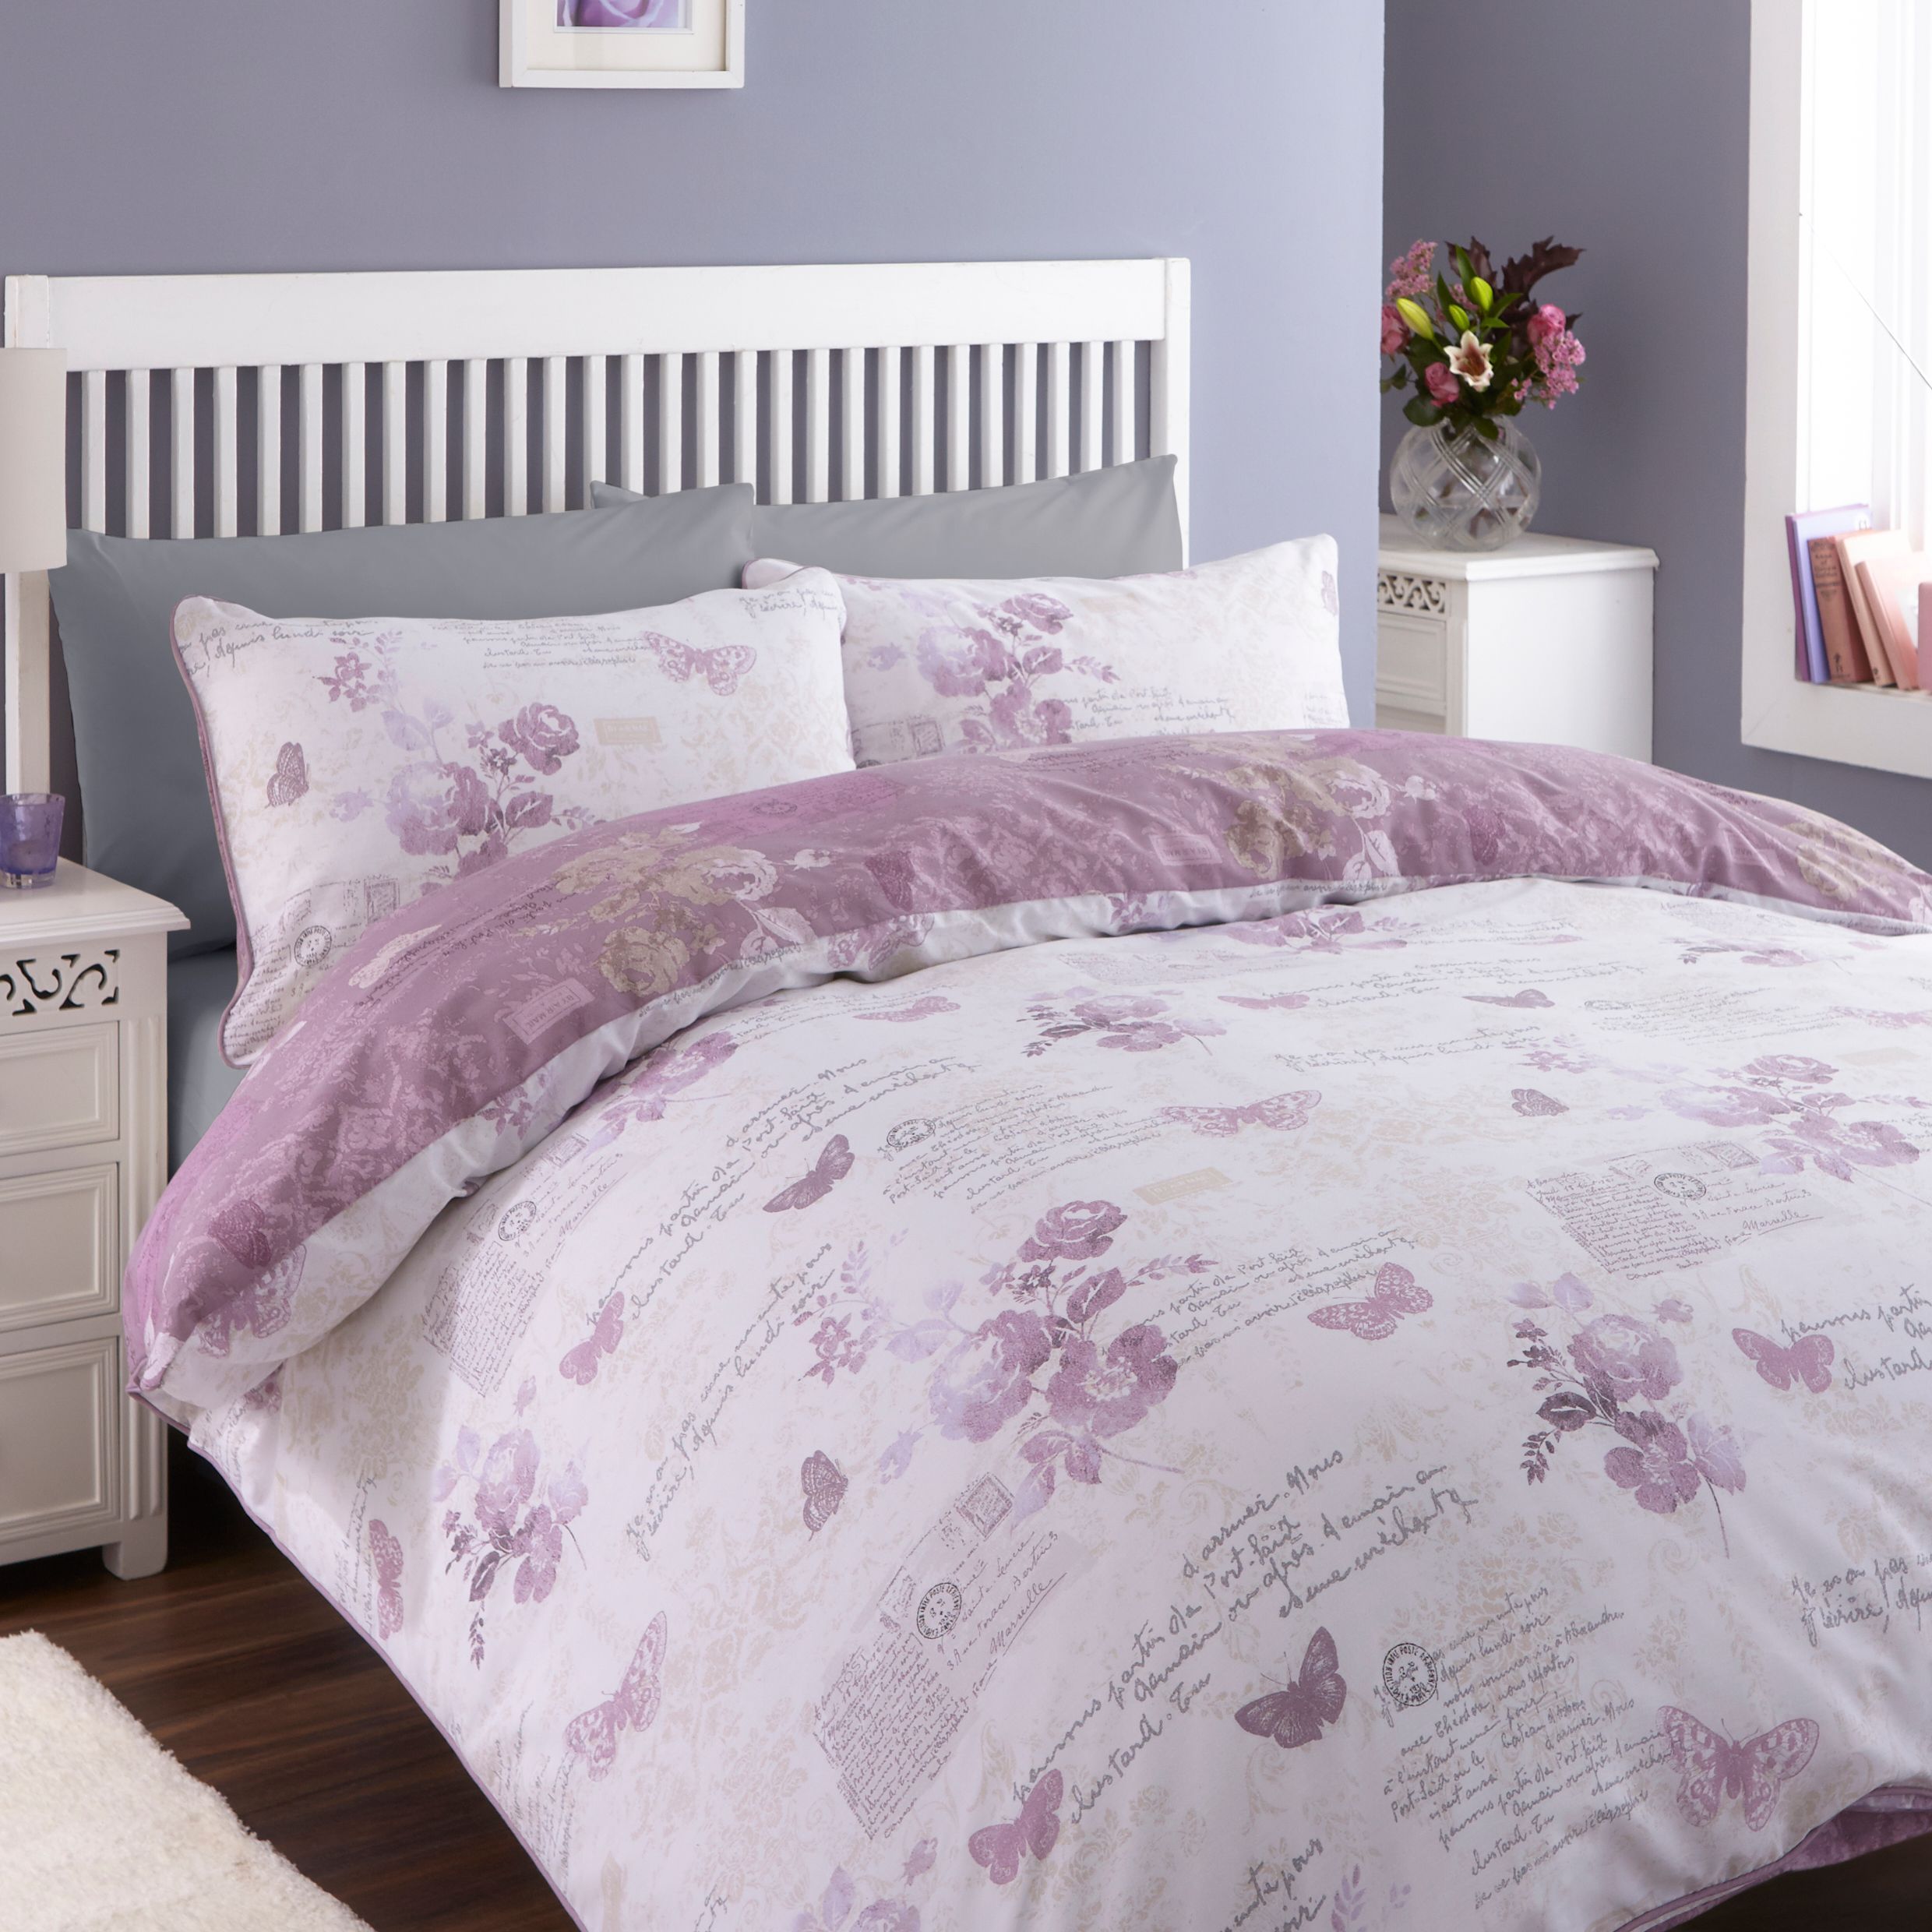 Wisteria Butterfly Birds Floral Duvet Quilt Cover Floral Bedding